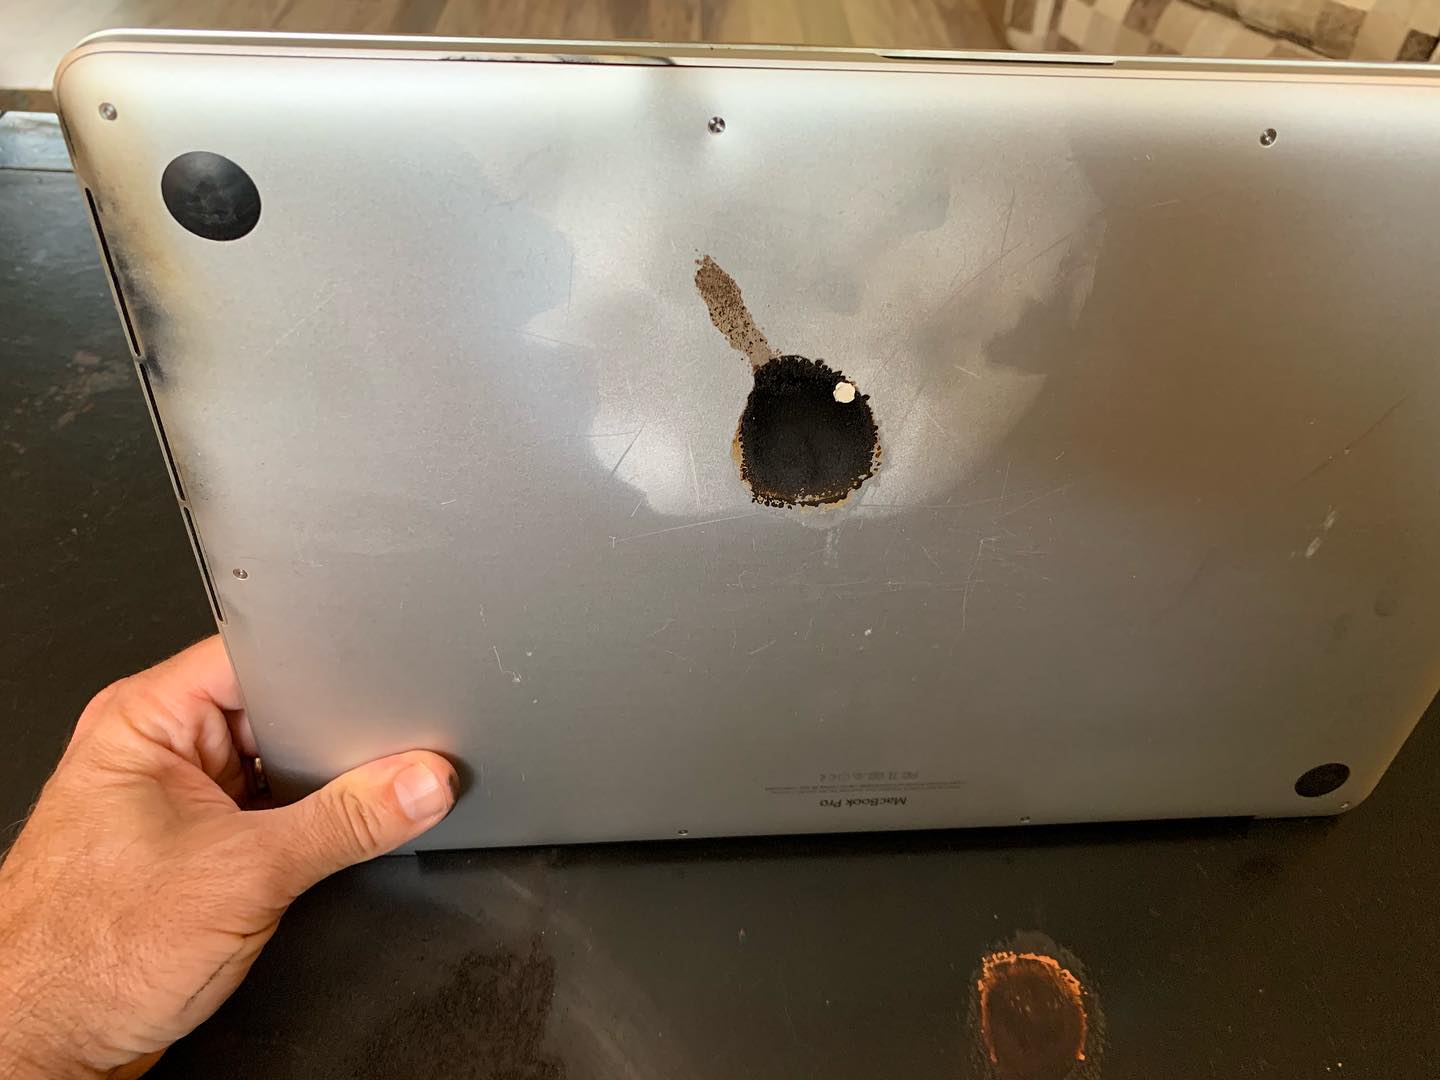 Travelling with this recalled 15-inch MacBook Pro could mean getting stranded in another country - Alvinology